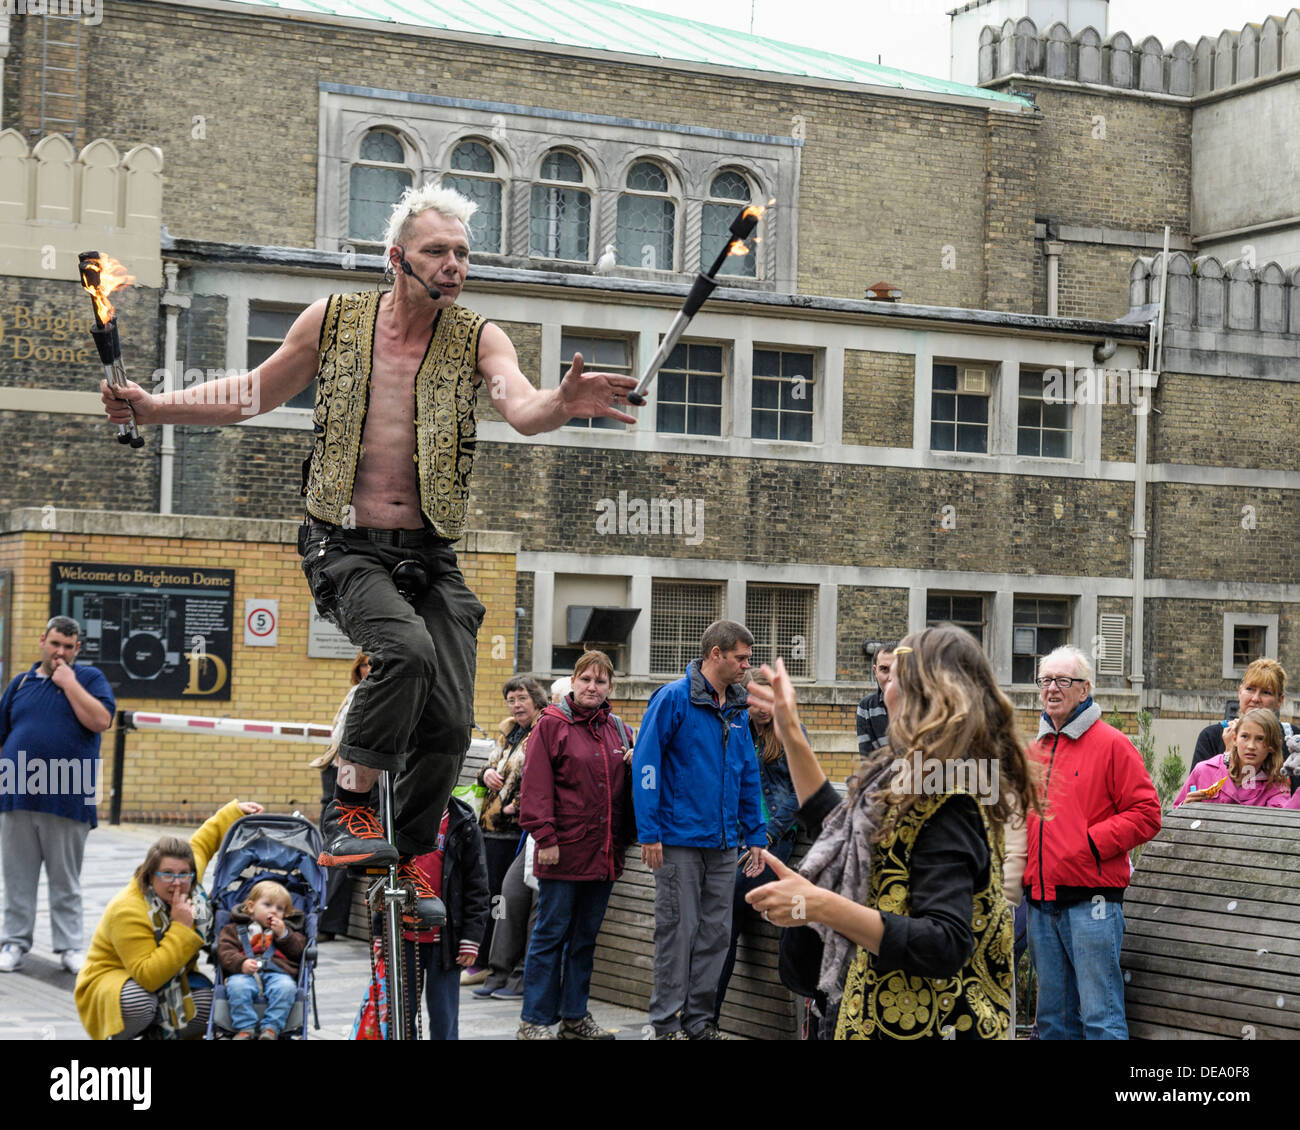 Brighton, UK, 14/09/2013 : A street performer on a high unicycle catches flaming juggling sticks. Picture by Julie Edwards Stock Photo